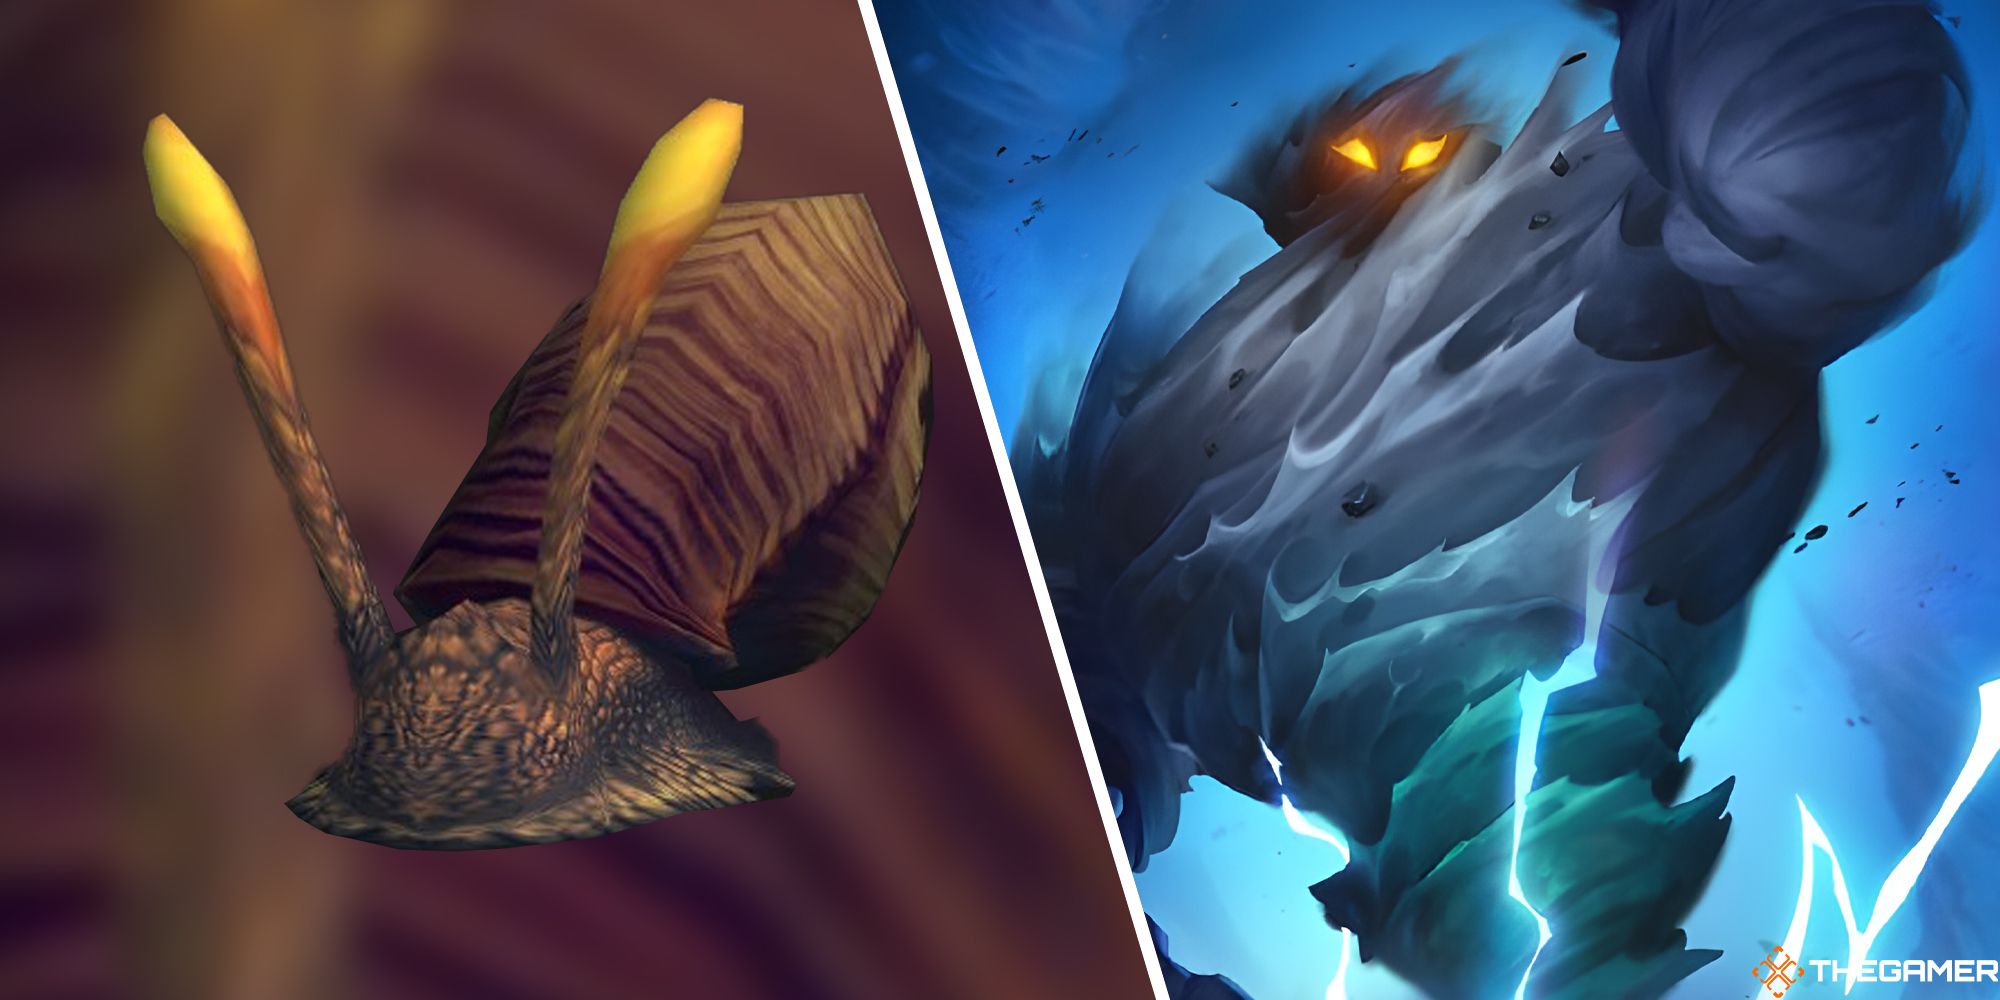 A Snail and Stormammu in WoW: Dragonflight